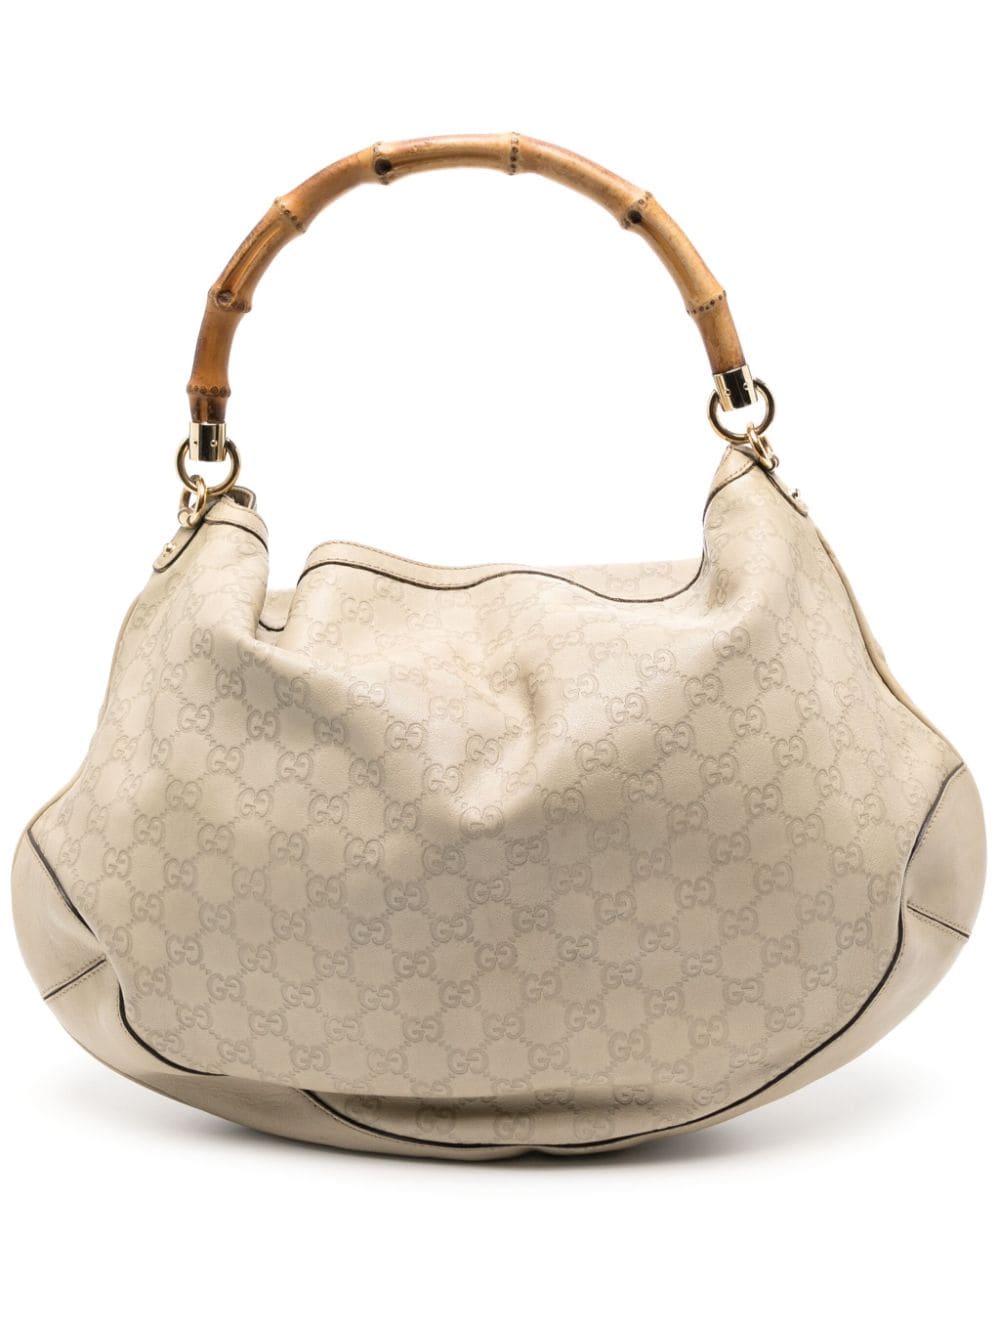 Gucci Pre-Owned bamboo-handle GG handbag - Neutrals von Gucci Pre-Owned